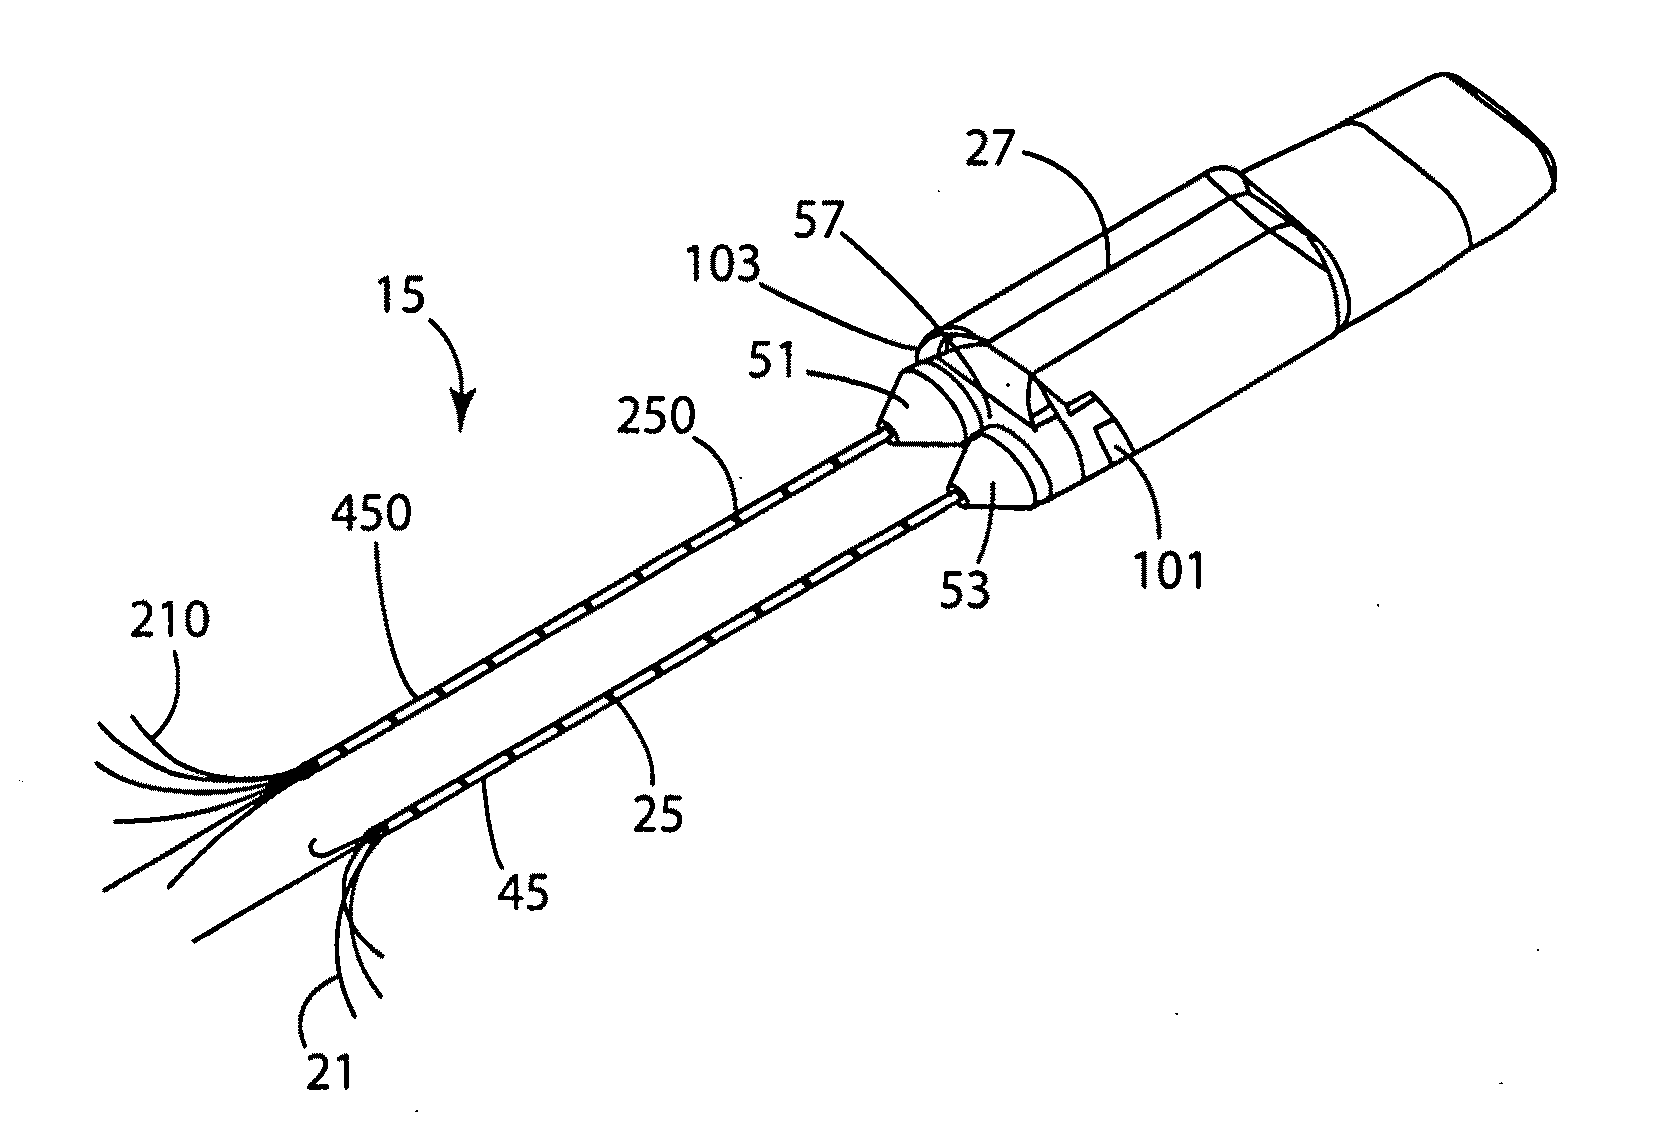 Dual Bracketed Energy Delivery Probe and Method of Use